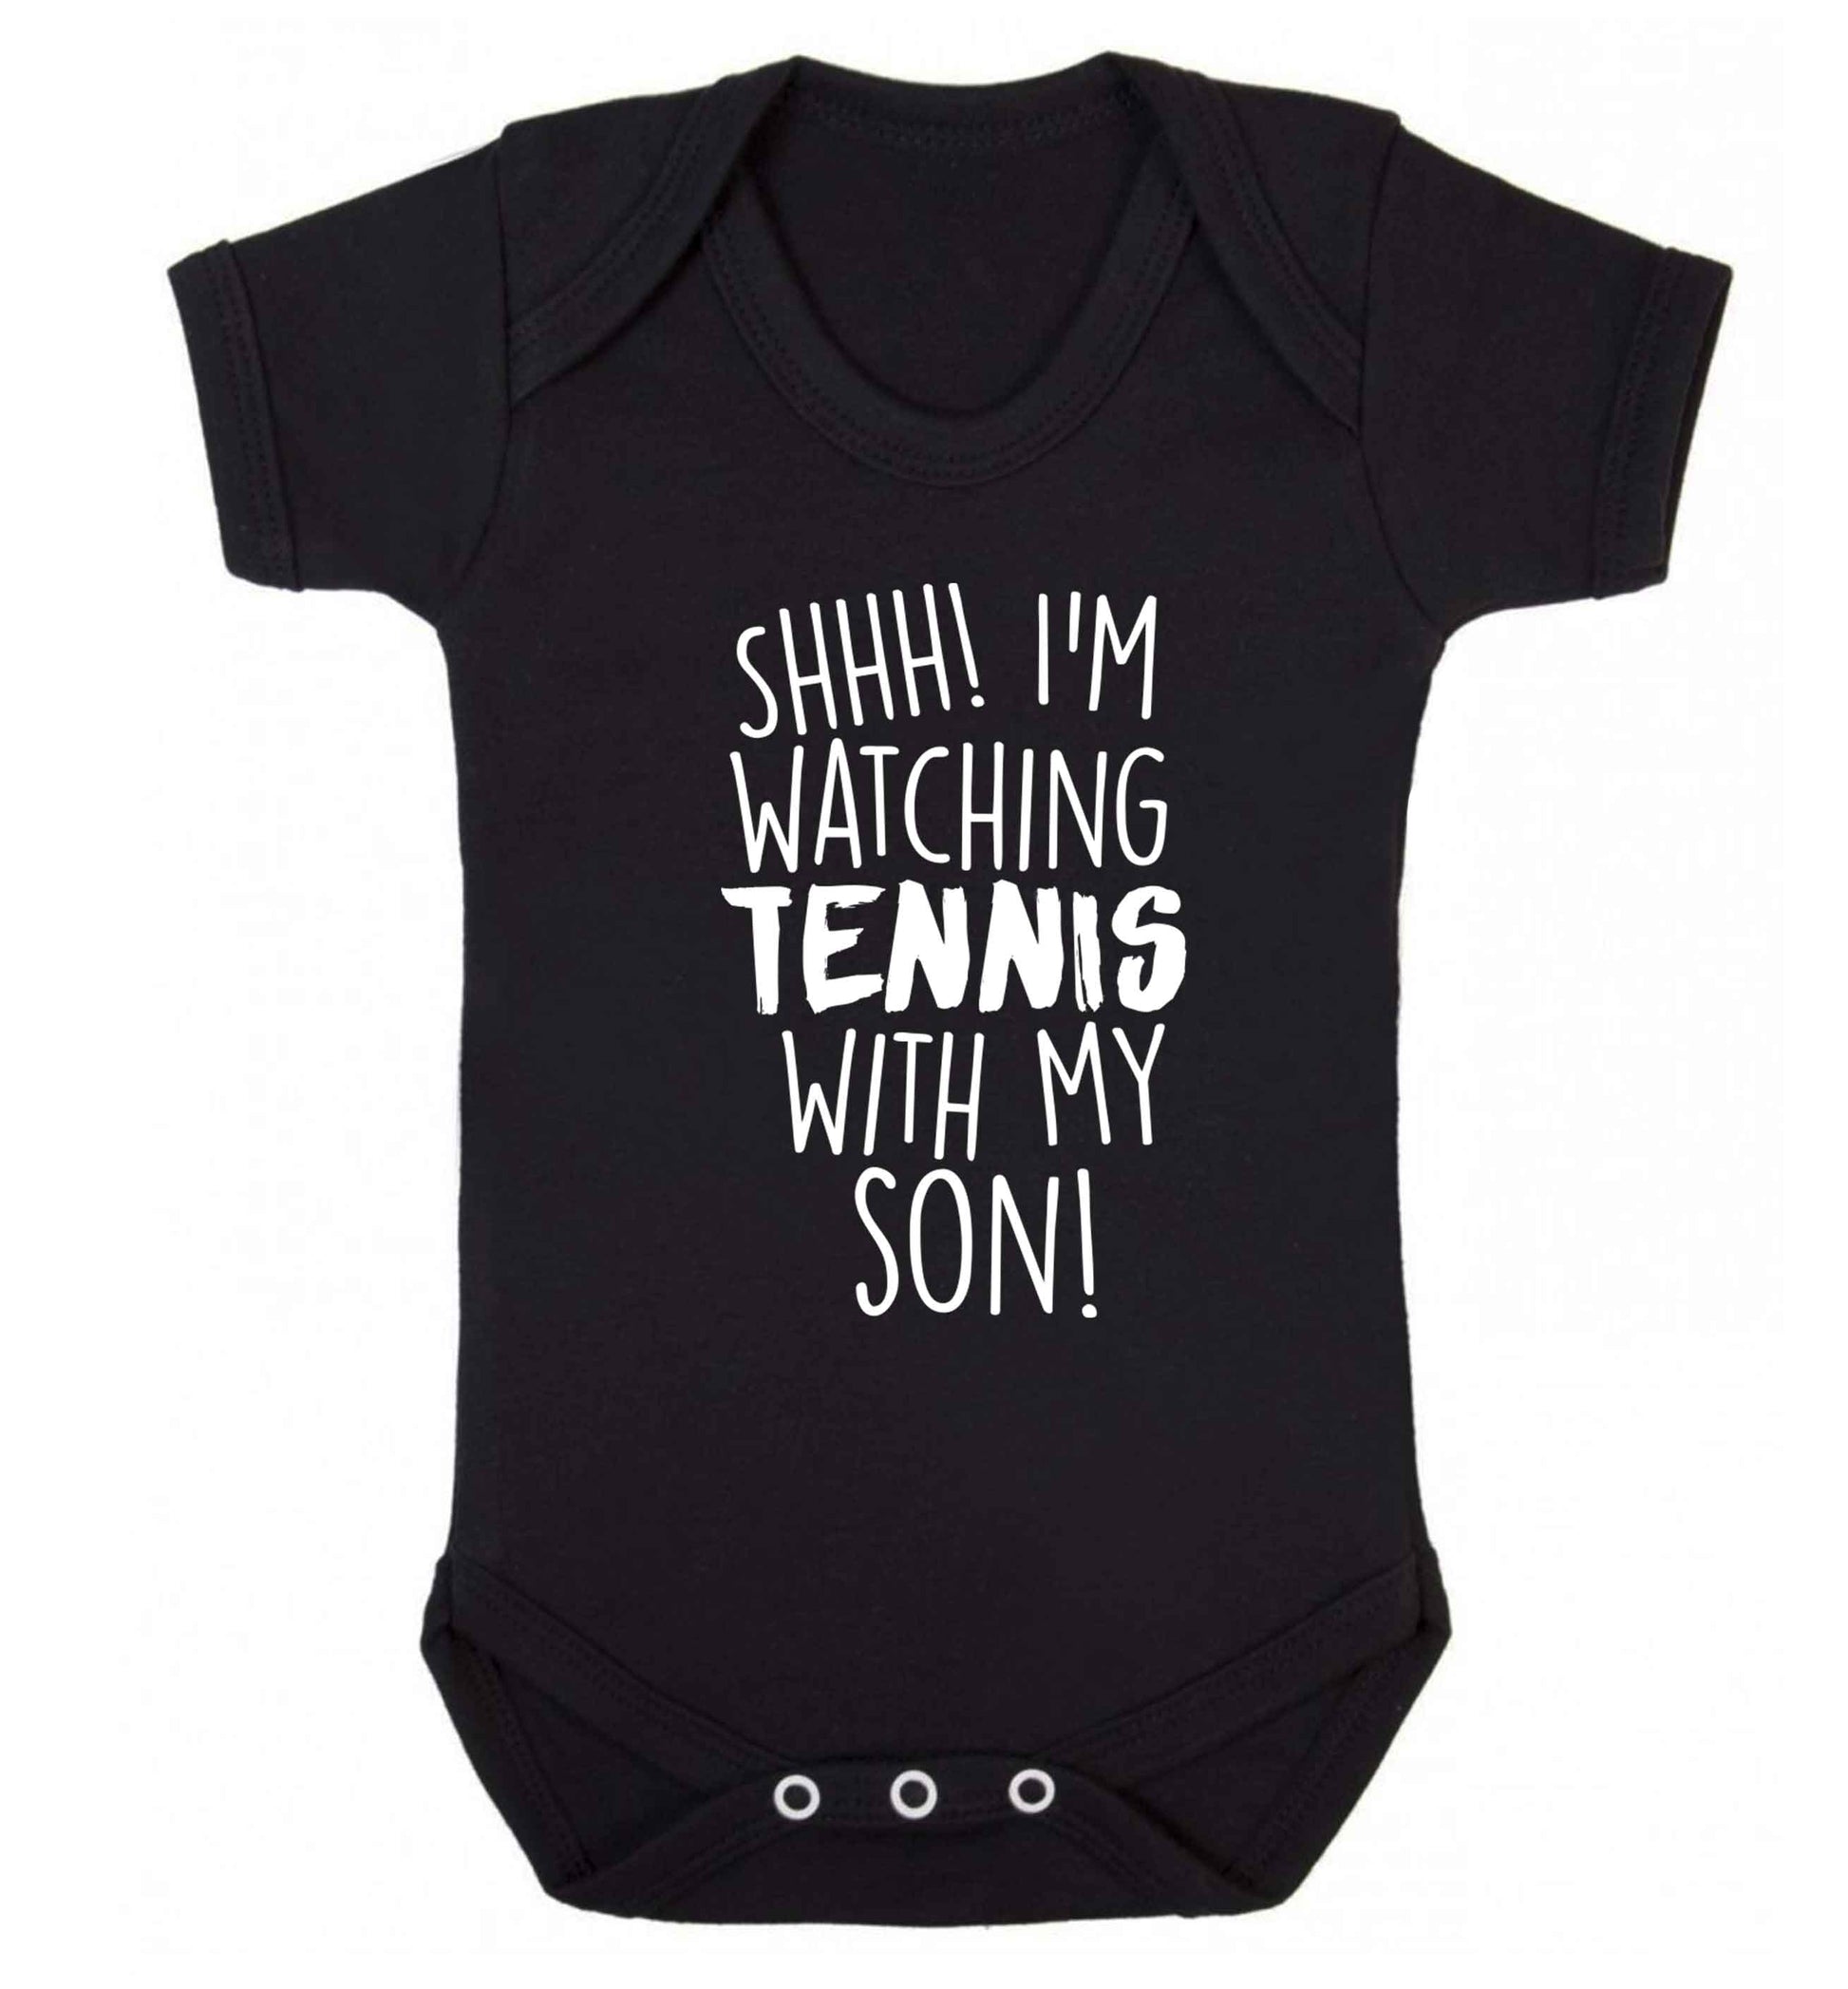 Shh! I'm watching tennis with my son! Baby Vest black 18-24 months